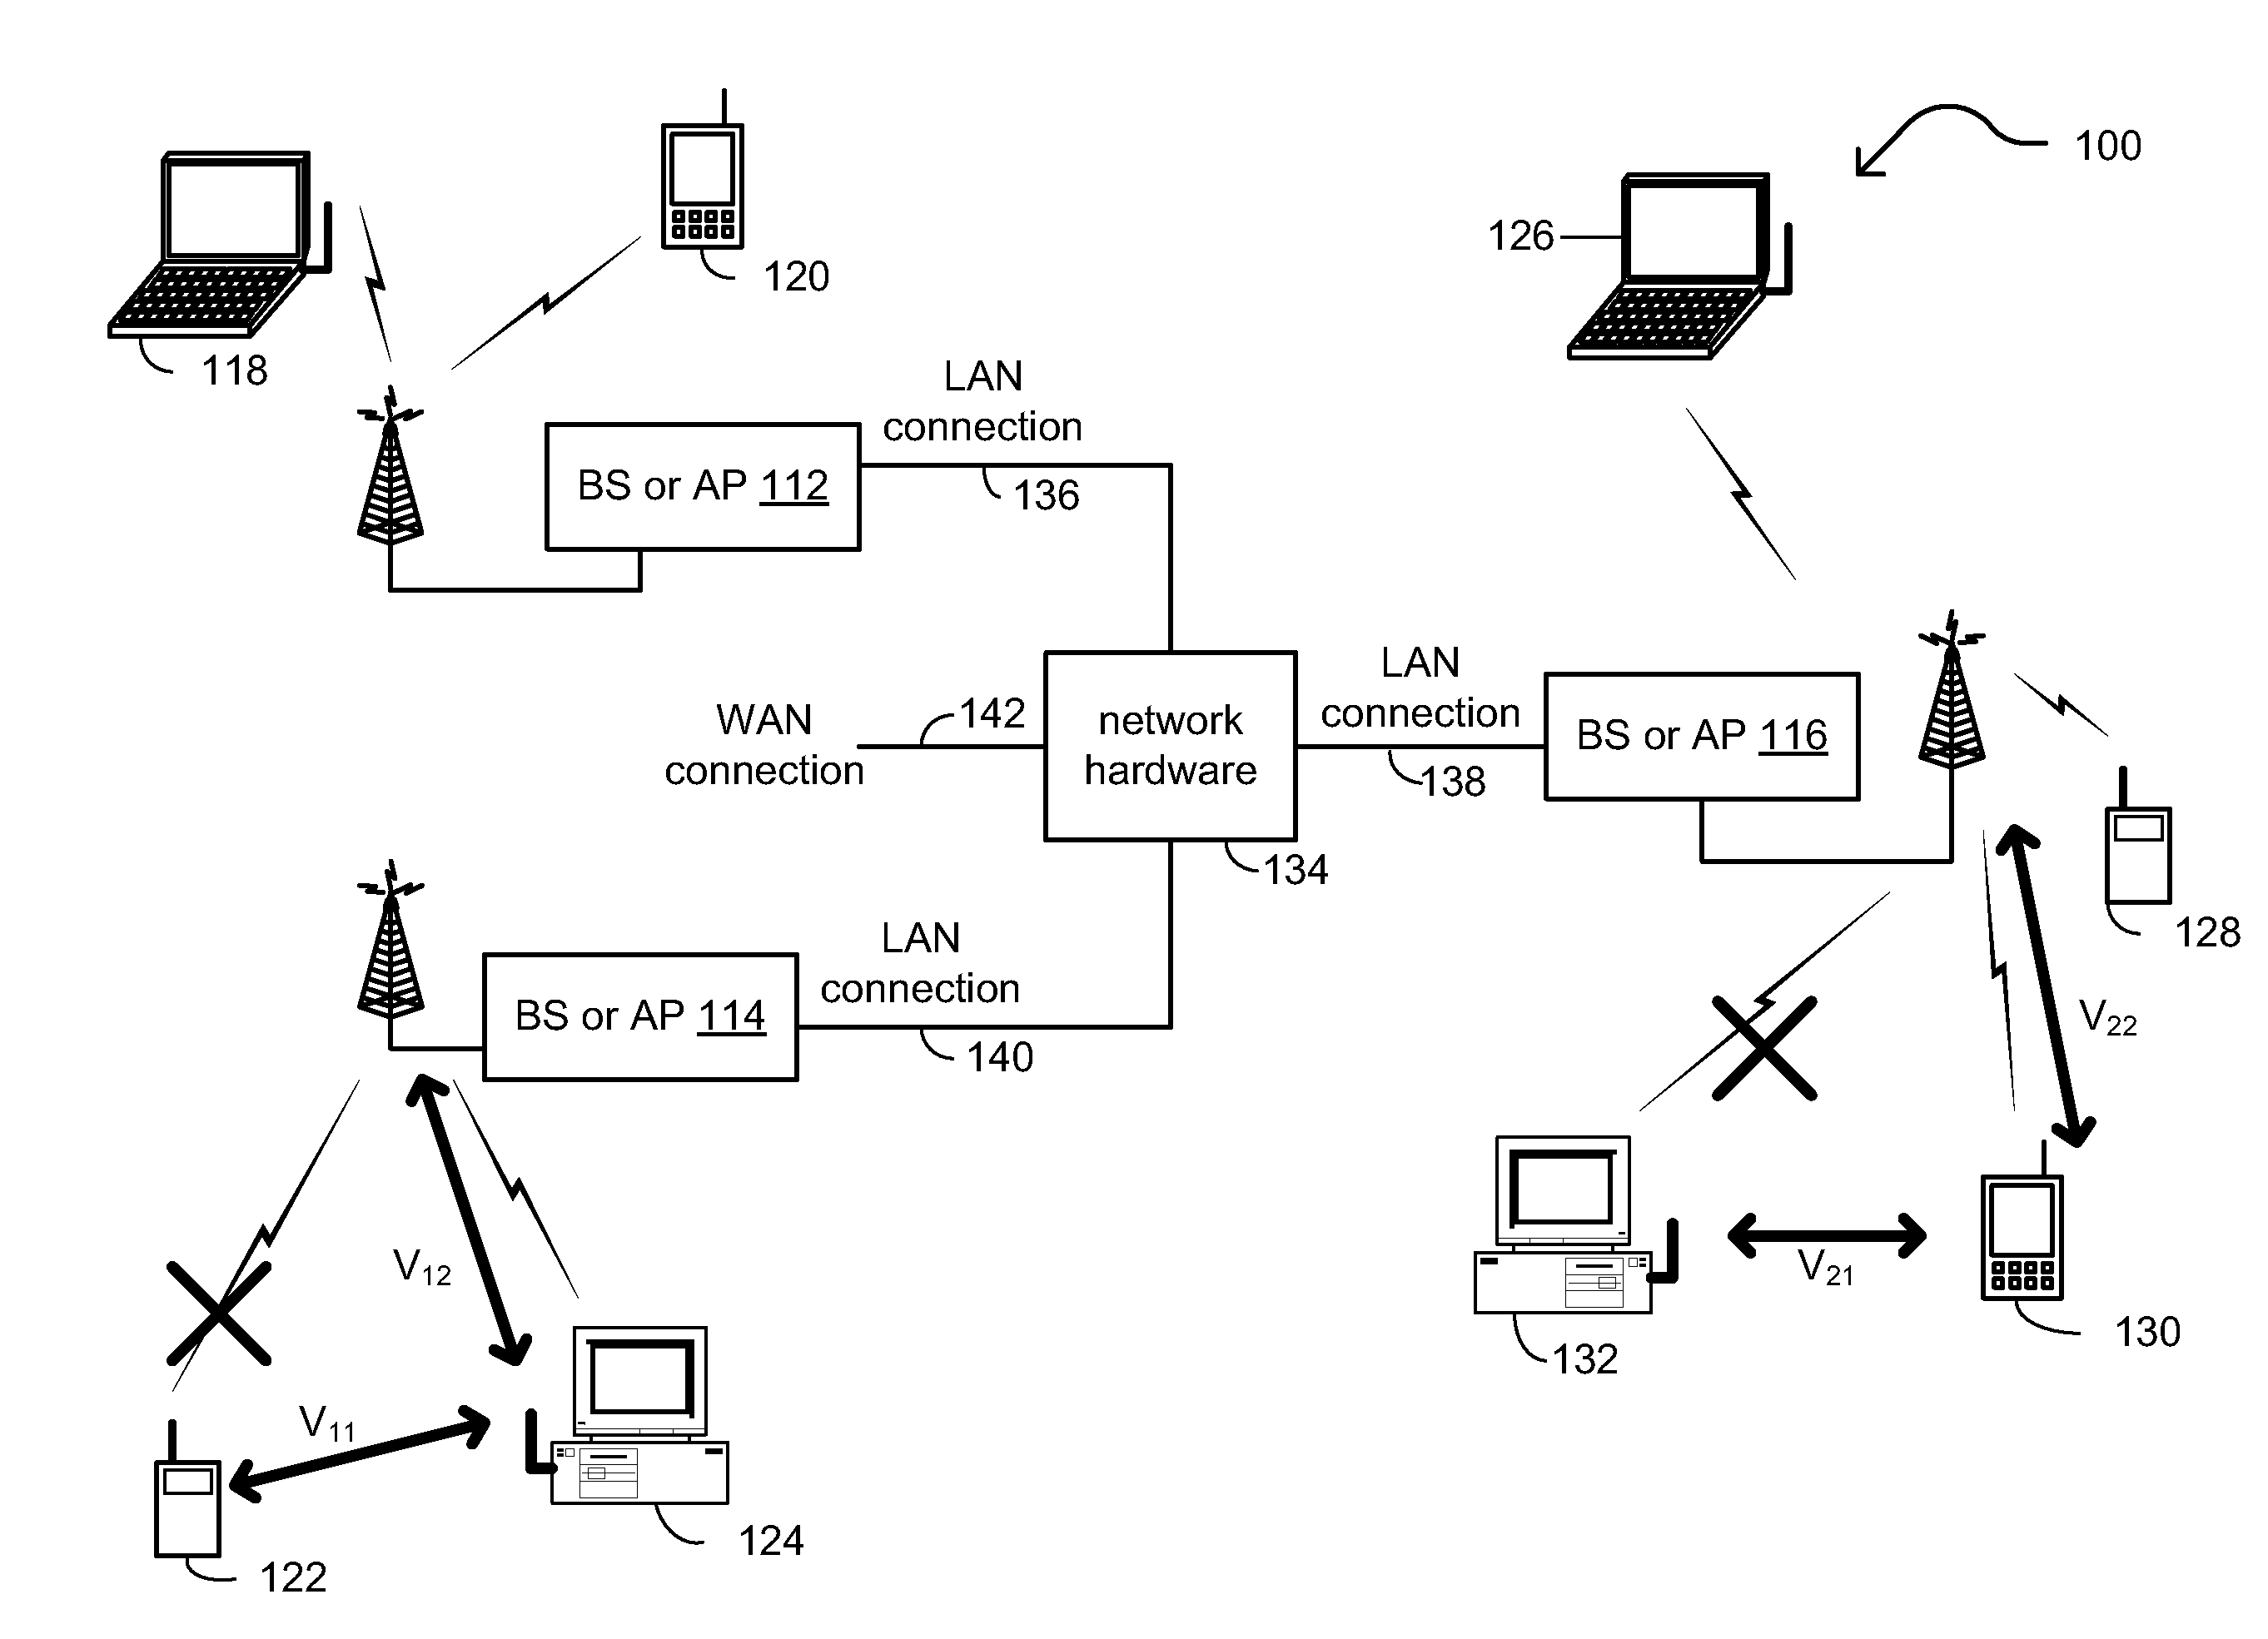 Probe request for relay discovery within single user, multiple user, multiple access, and/or MIMO wireless communications